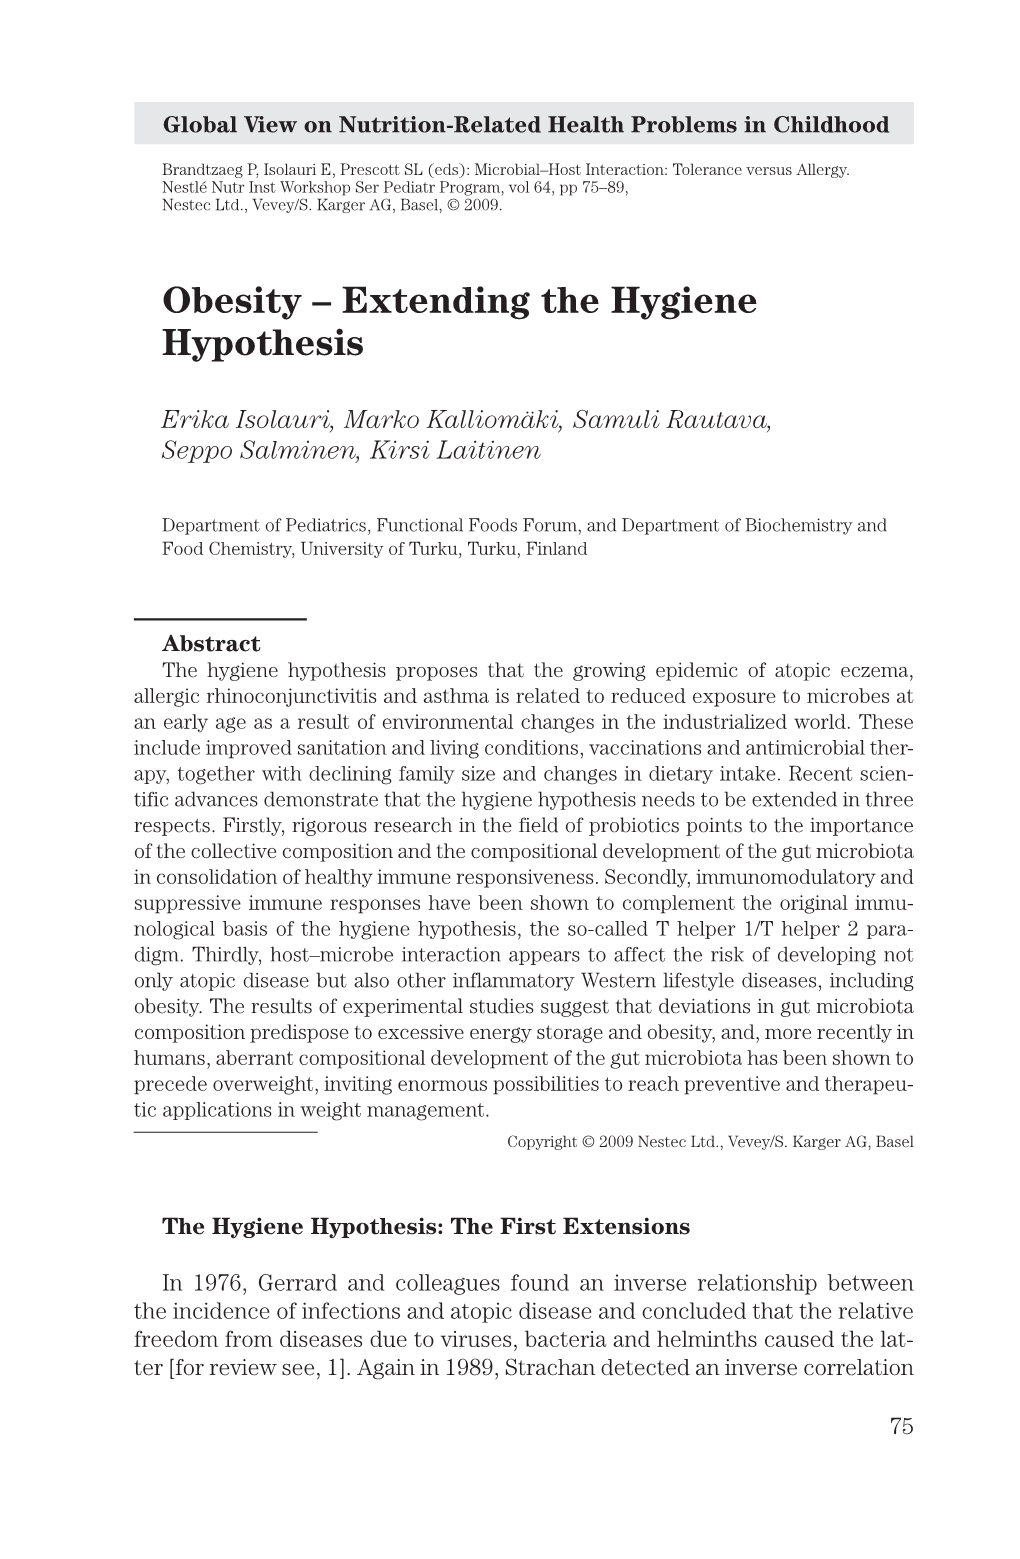 Obesity – Extending the Hygiene Hypothesis